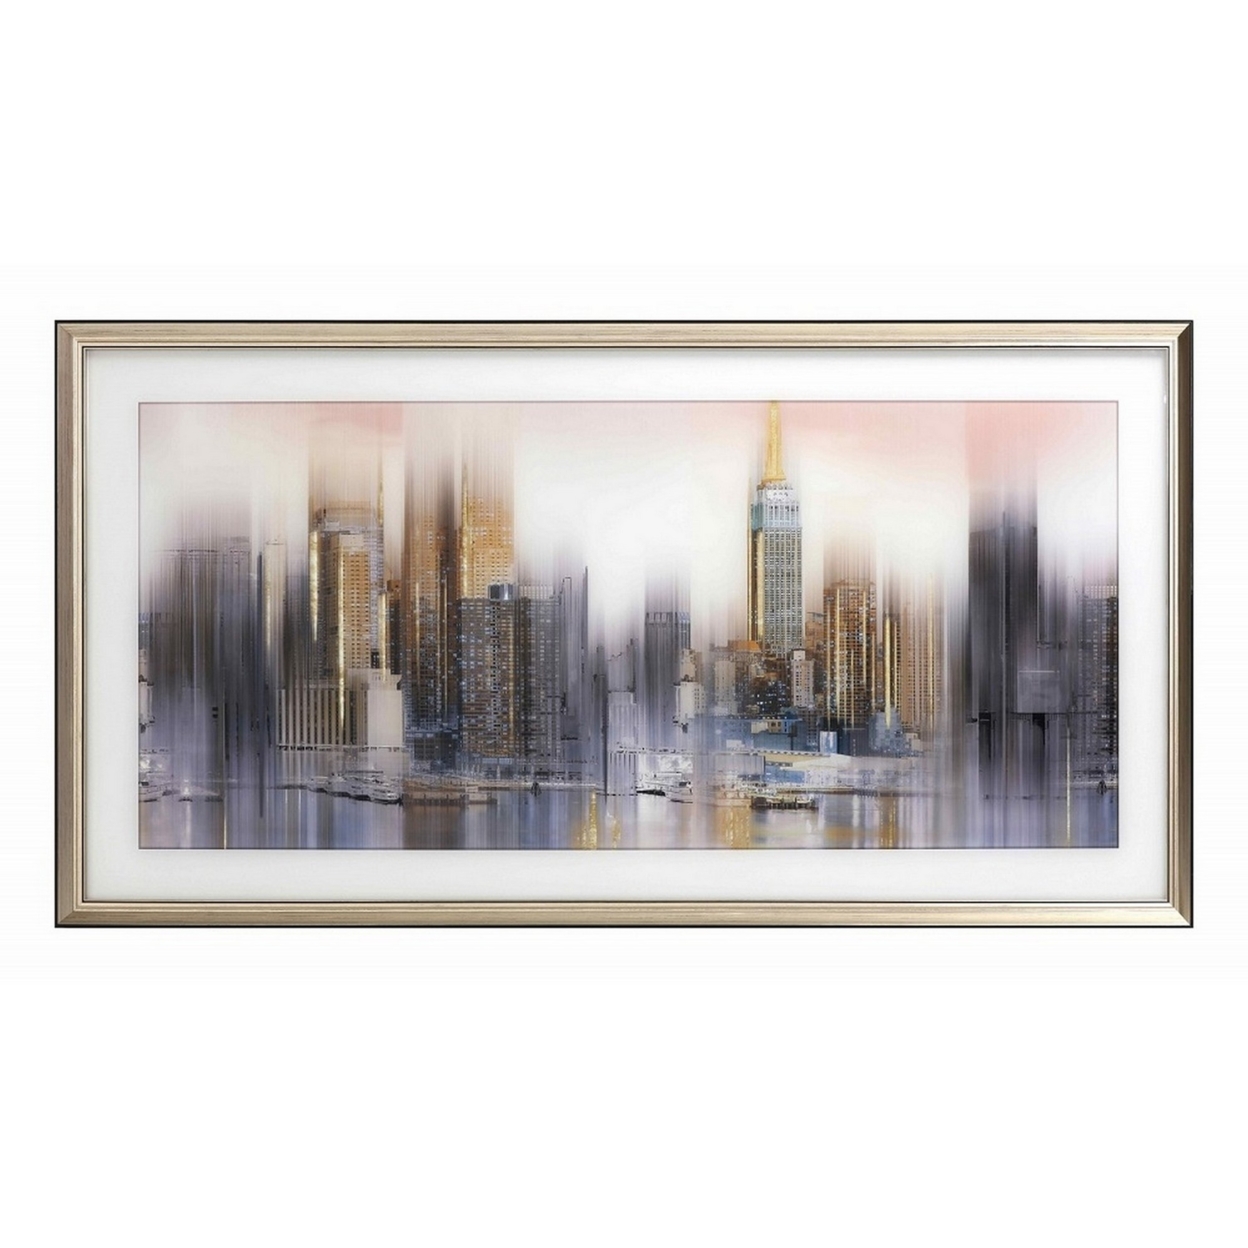 Wall Art With Resin Frame And Blurred Cityscape Painted Design, Gold- Saltoro Sherpi